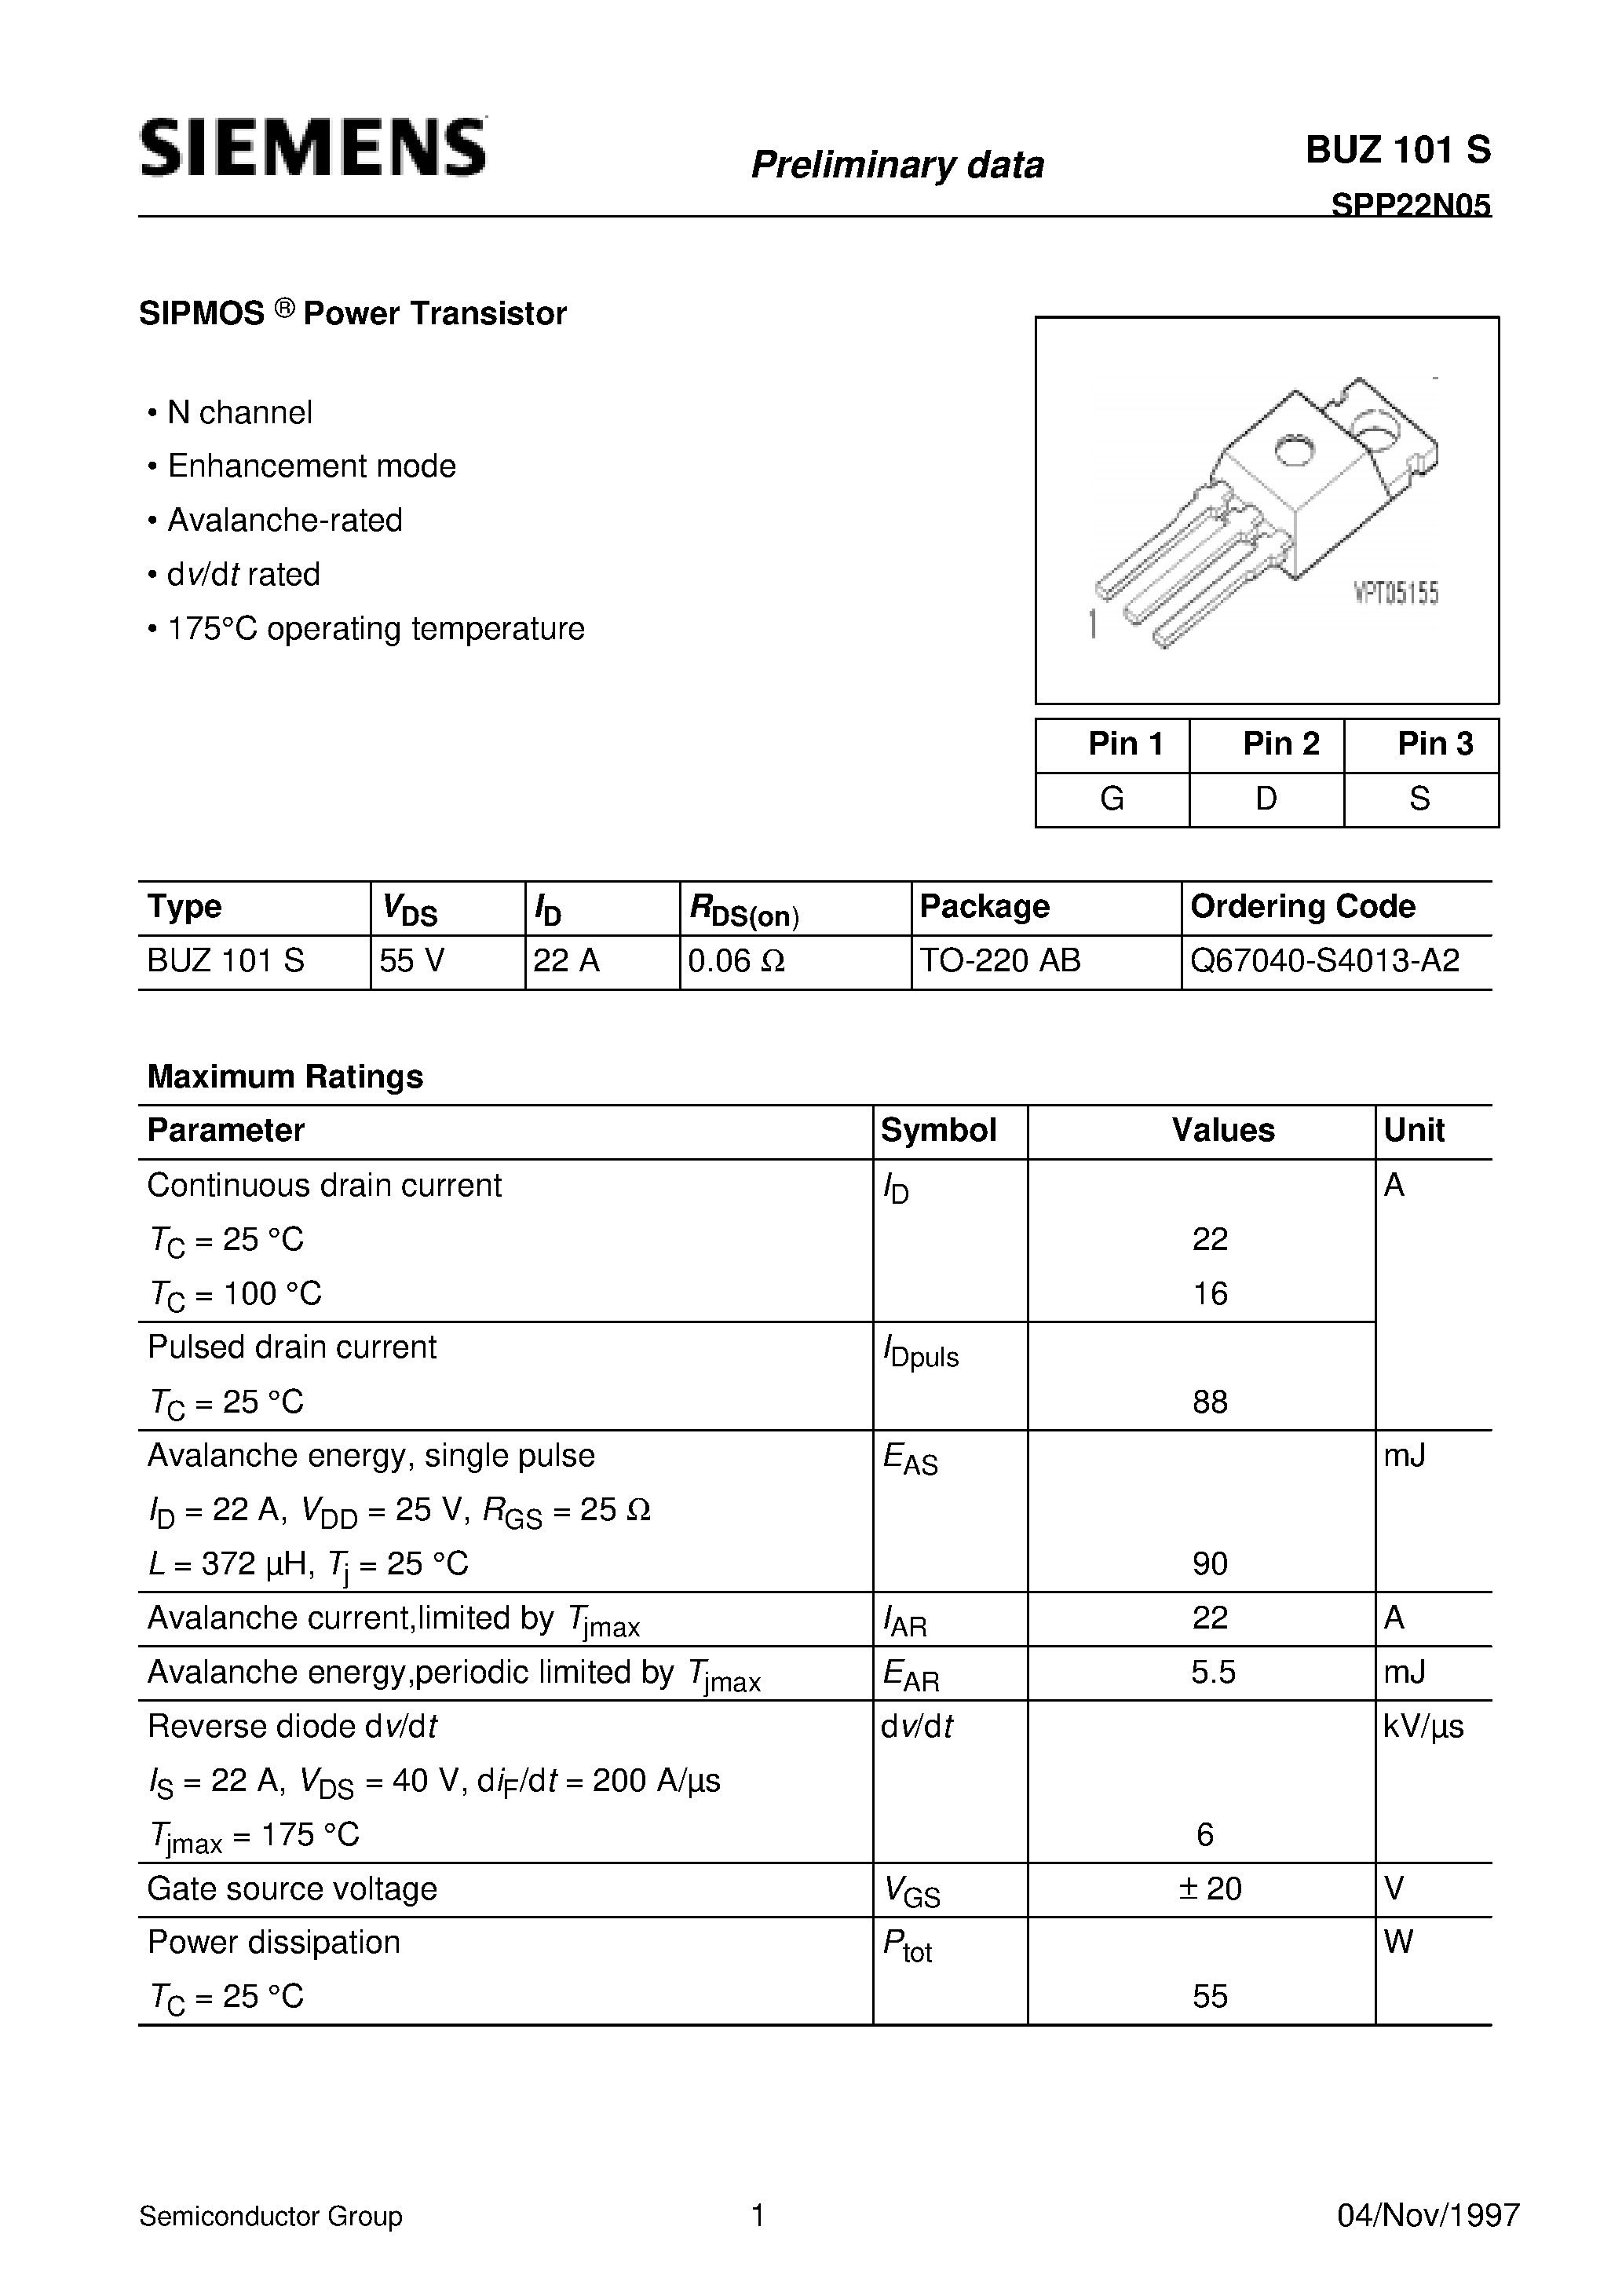 Datasheet BUZ101S - SIPMOS Power Transistor (N channel Enhancement mode Avalanche-rated d v/d t rated) page 1